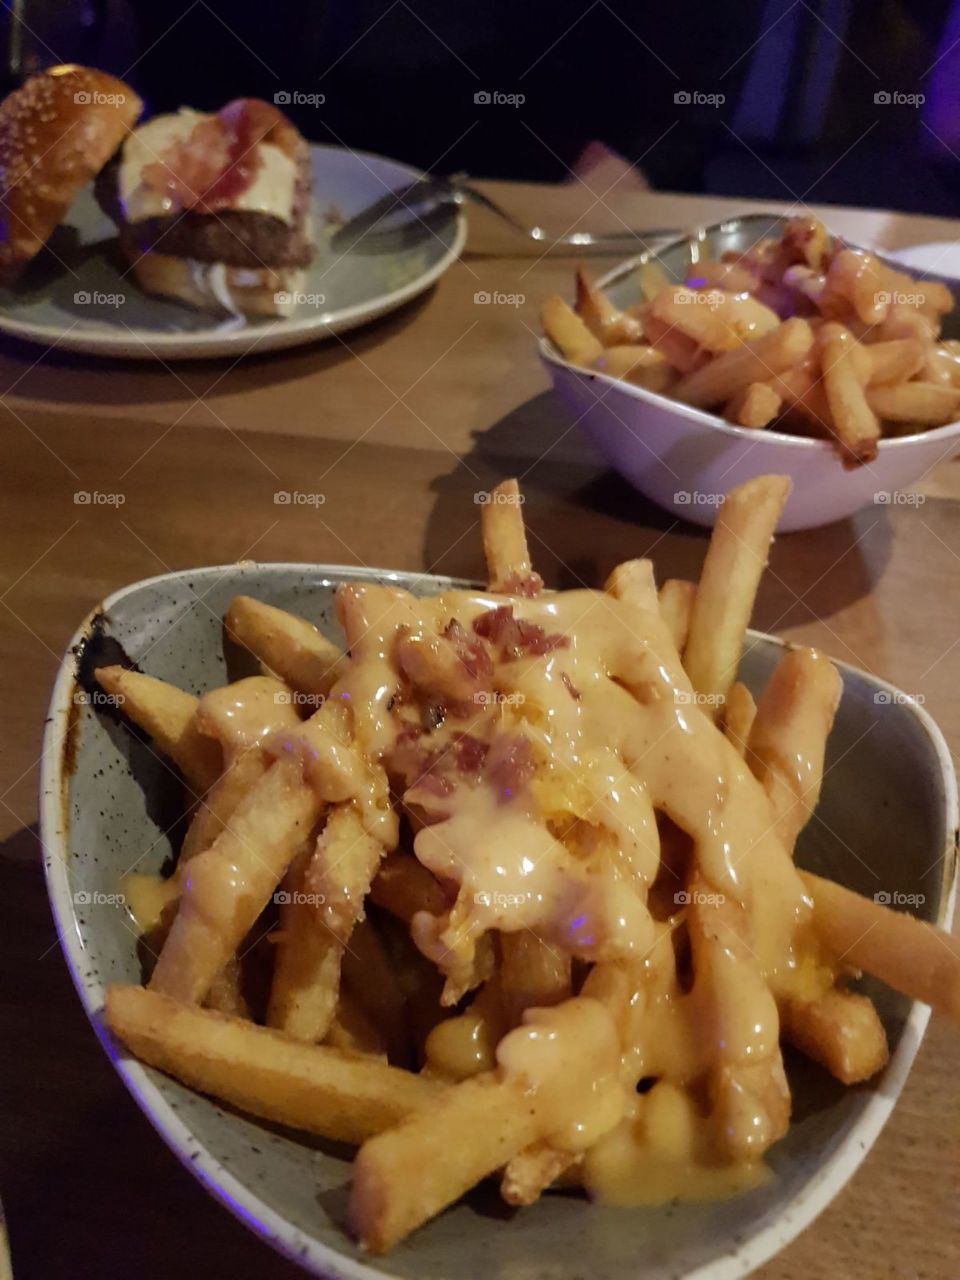 Sometimes you just have to let go and eat a bunch of cheese fries. The diet can wait until tomorrow.